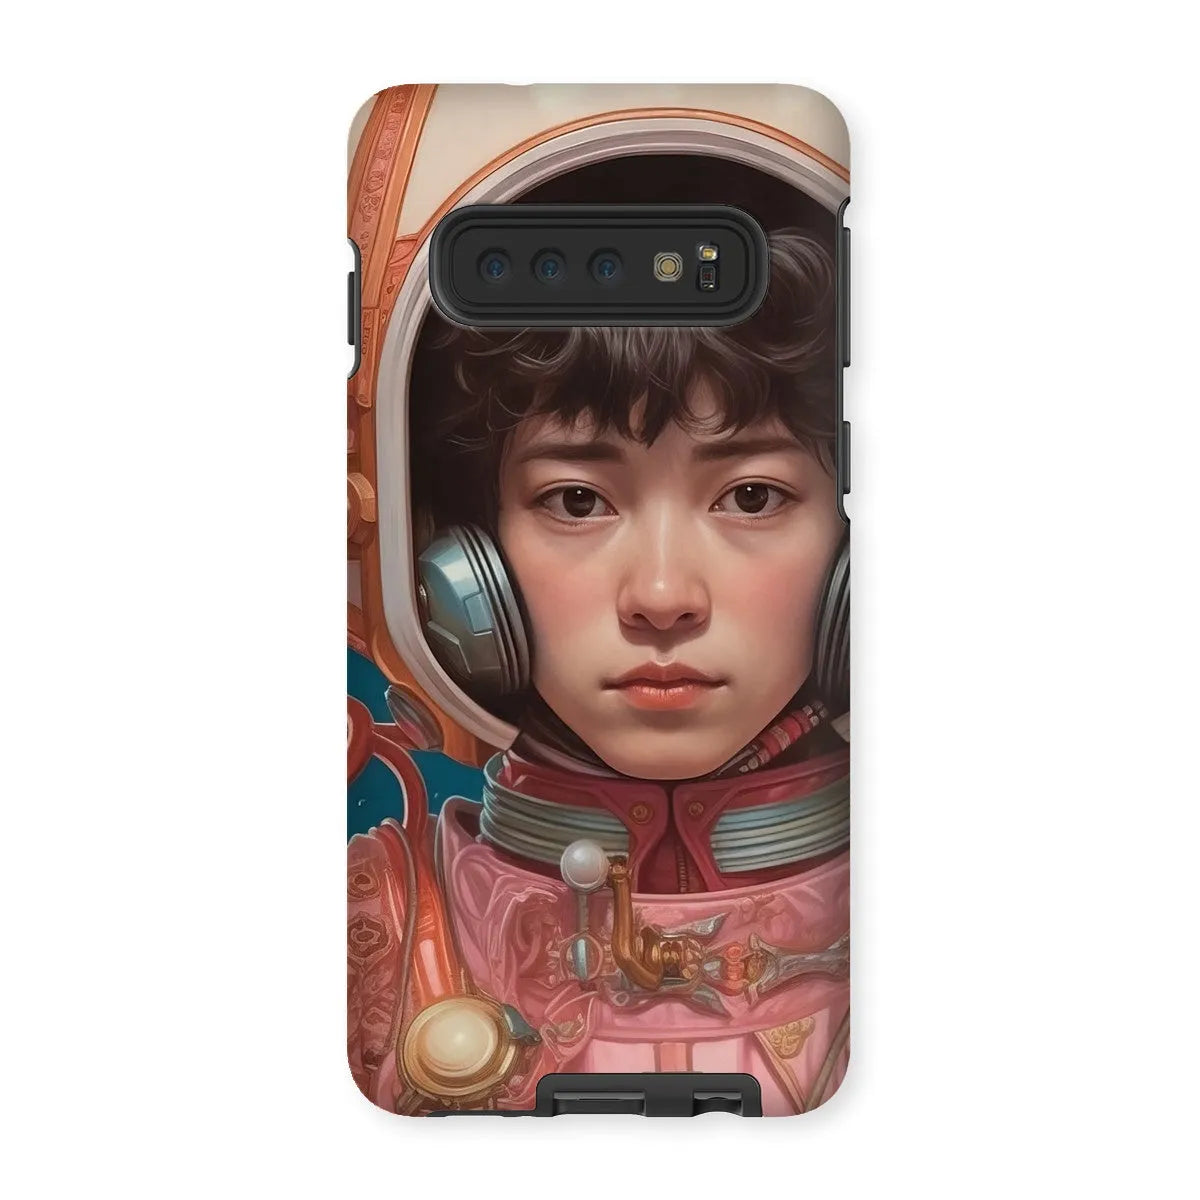 Kaito The Gay Astronaut - Lgbtq Art Phone Case - Samsung Galaxy S10 / Matte - Mobile Phone Cases - Aesthetic Art